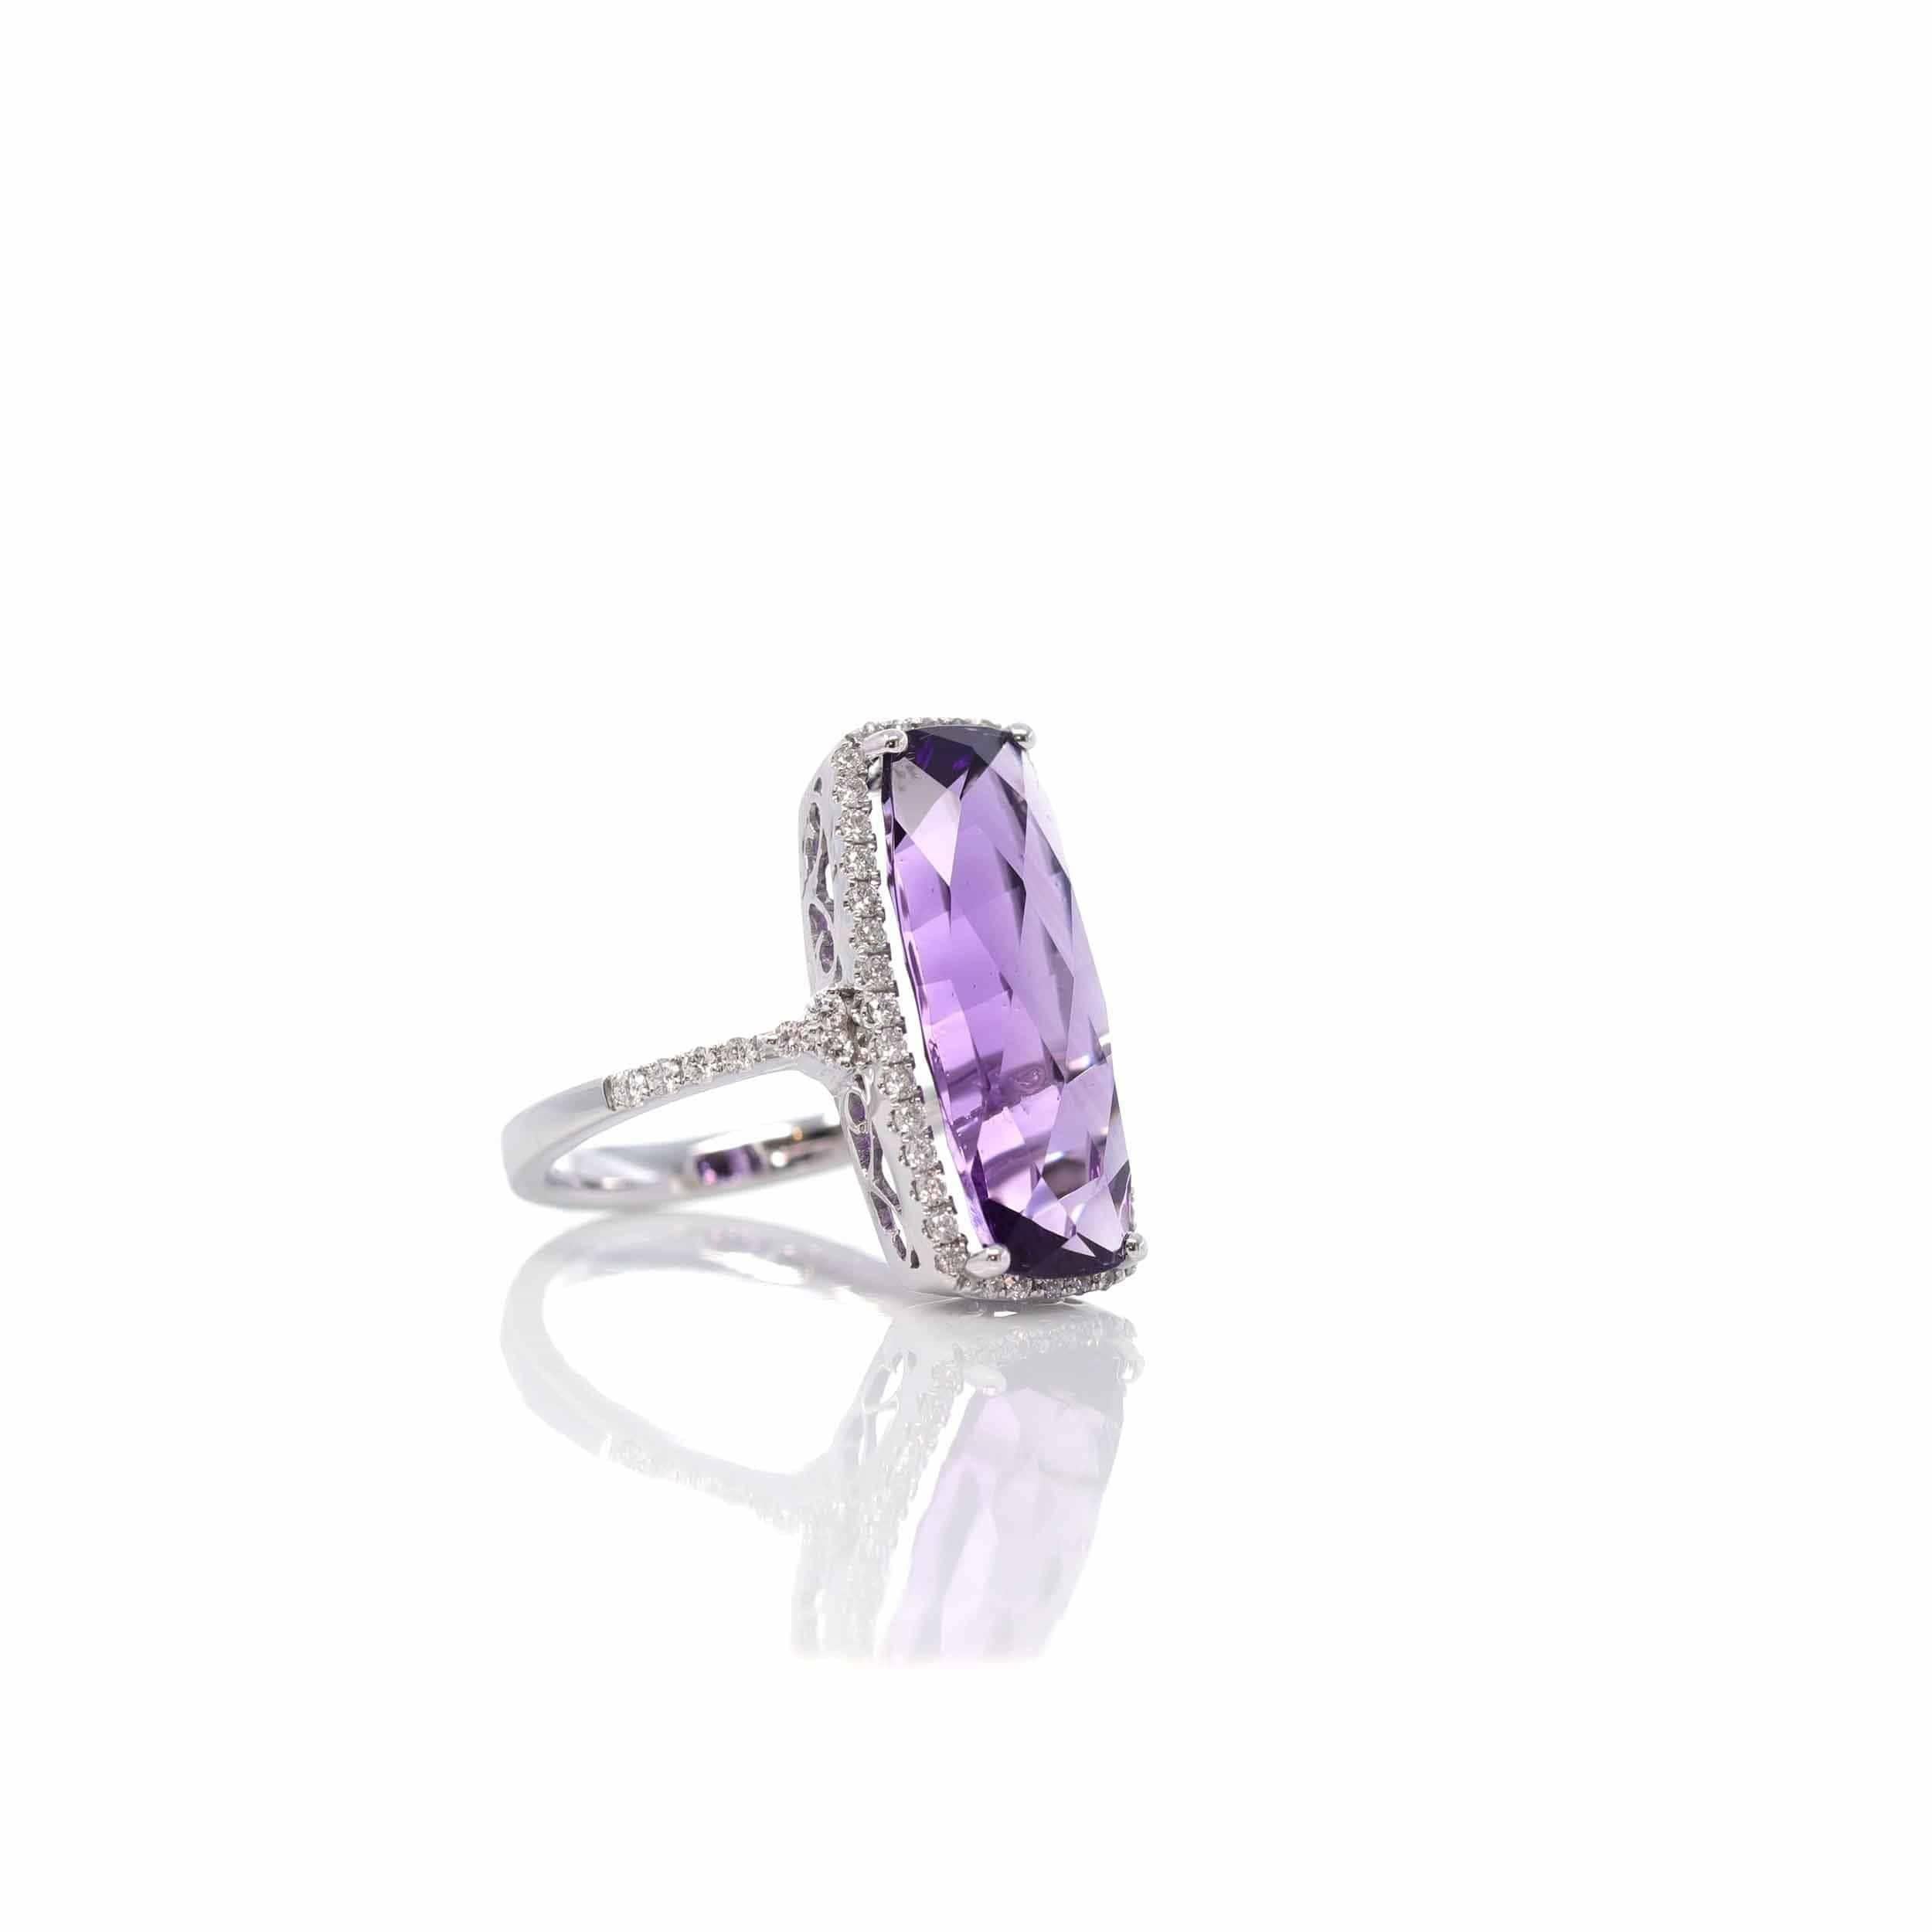 * Design Concept--- This ring features a Cushion Cut Brazillian Amethyst,6.099 ct genuine deep purple amethyst. The design is simplistic yet elegant. The ring looks very exquisite with some diamonds tracing the accents. Baikalla artisans are